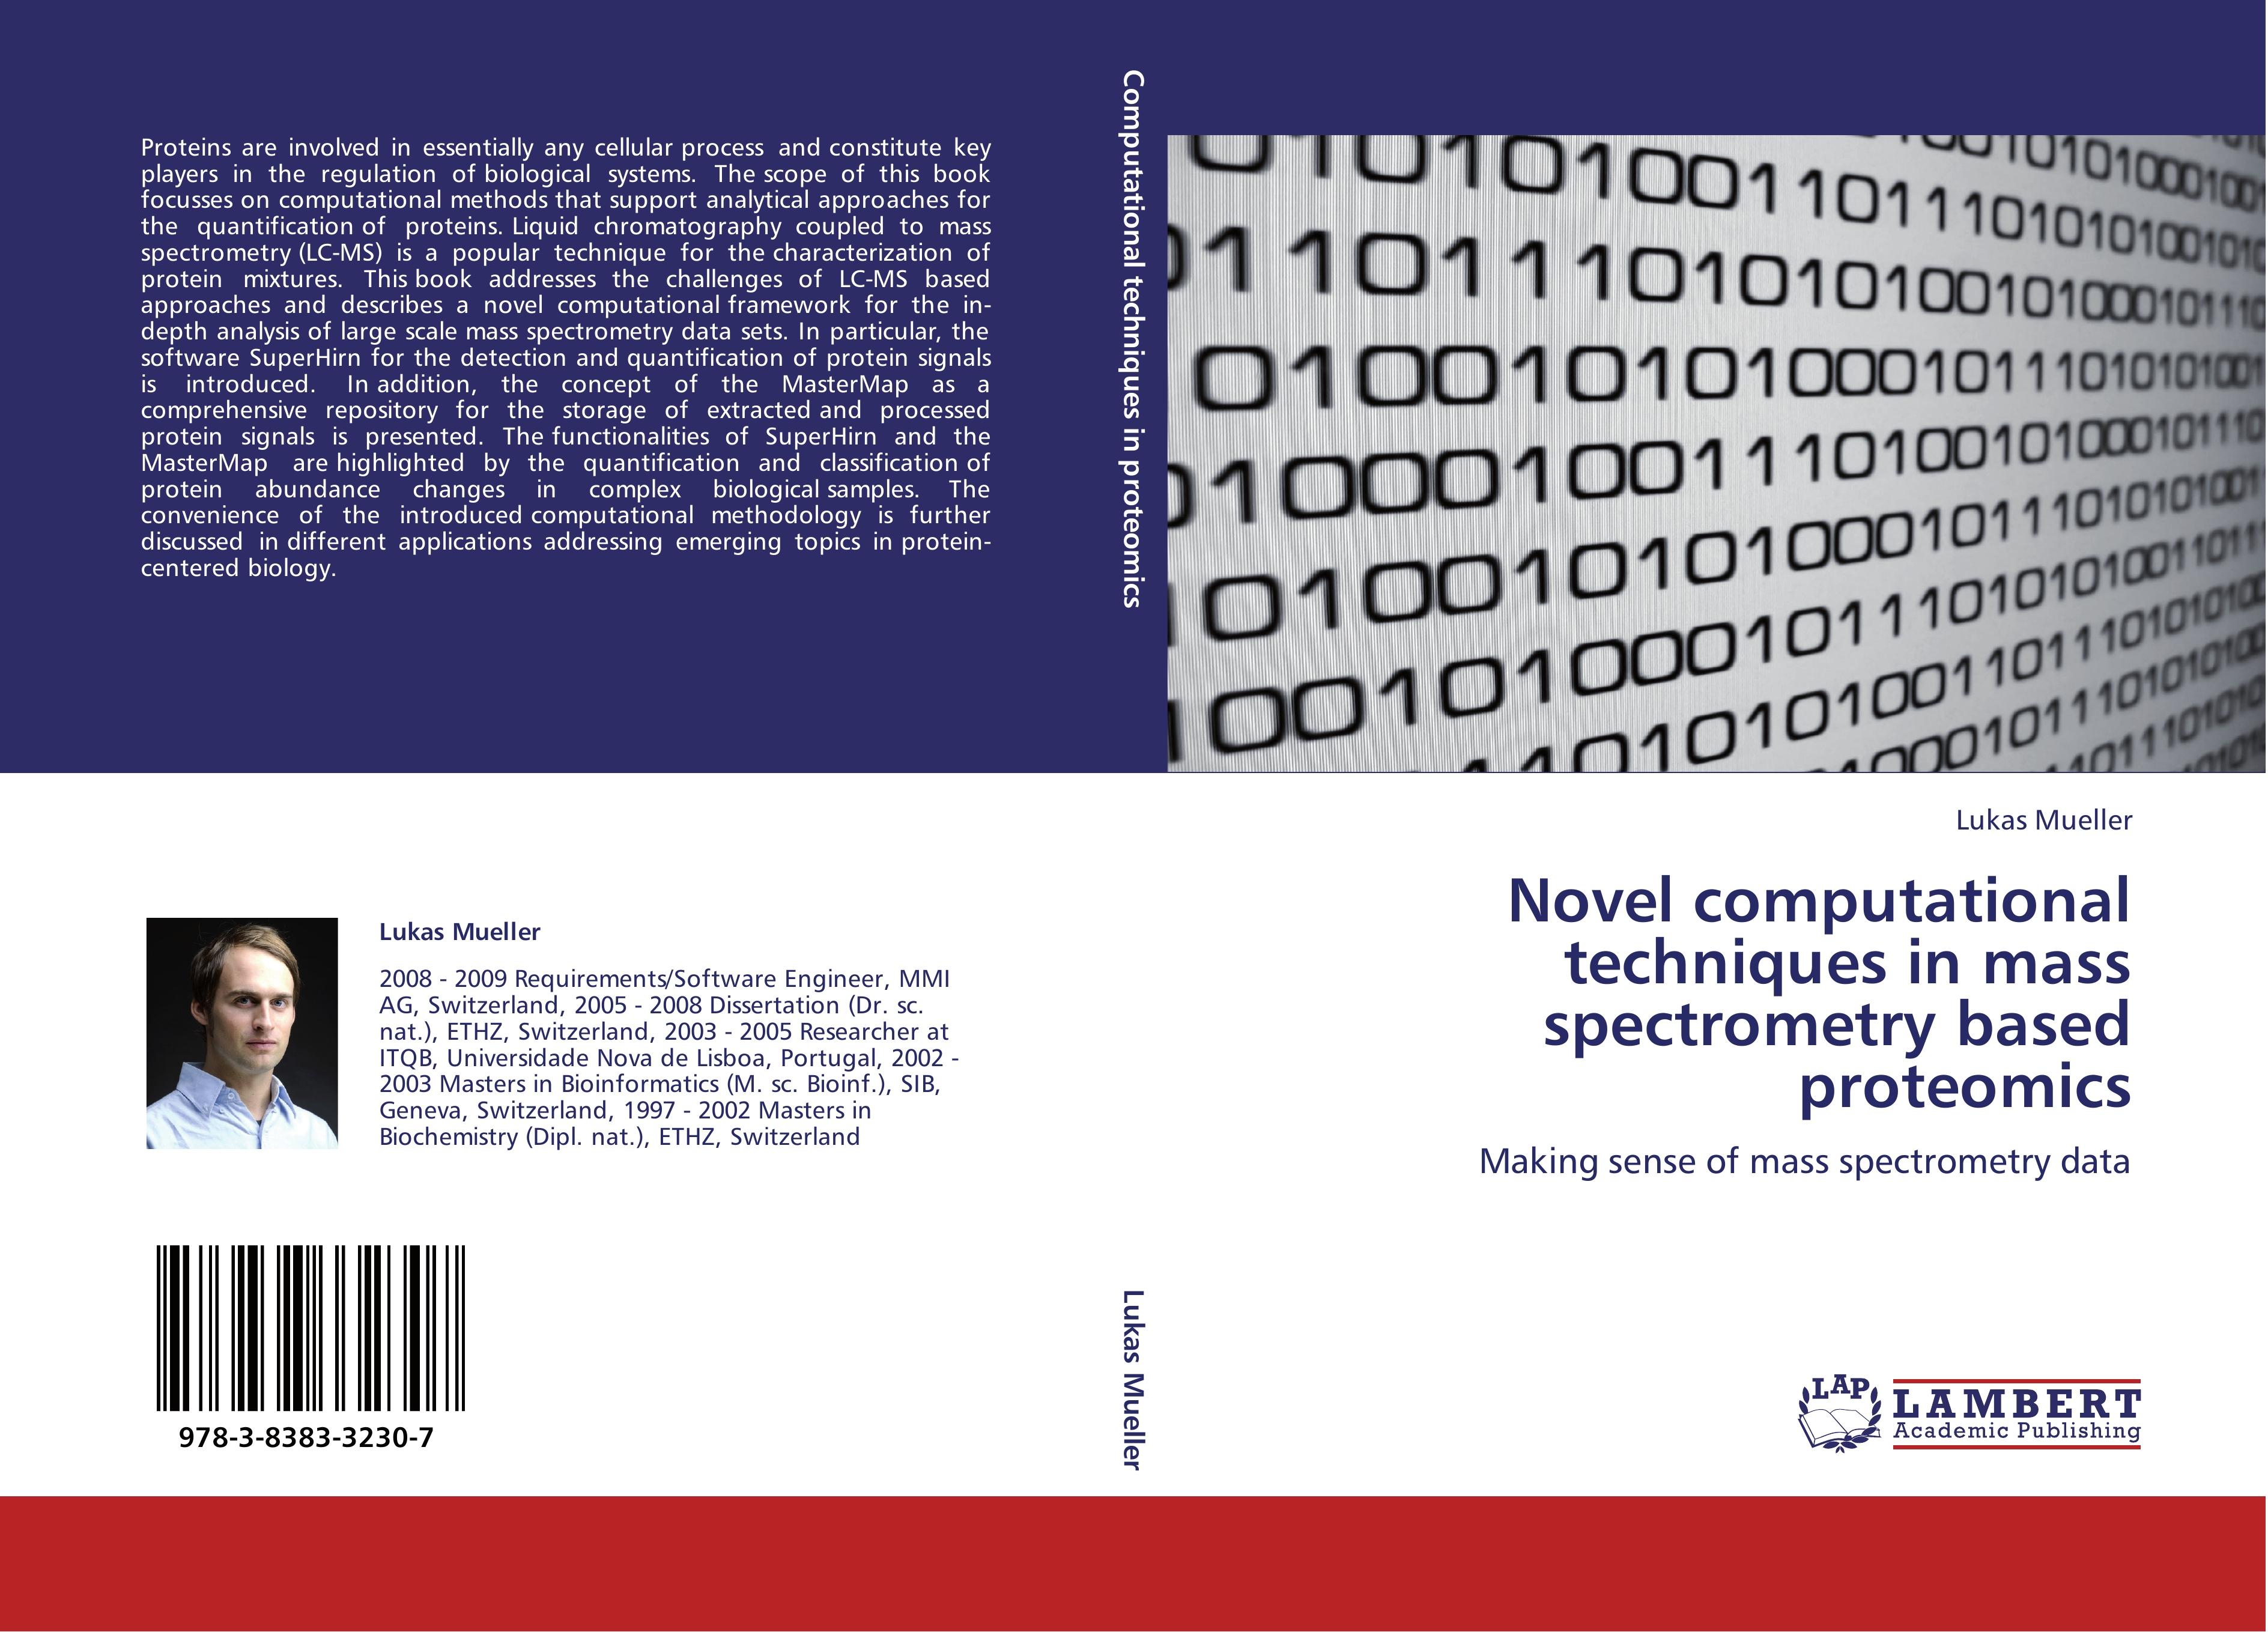 Novel computational techniques in mass spectrometry based proteomics - Lukas Mueller